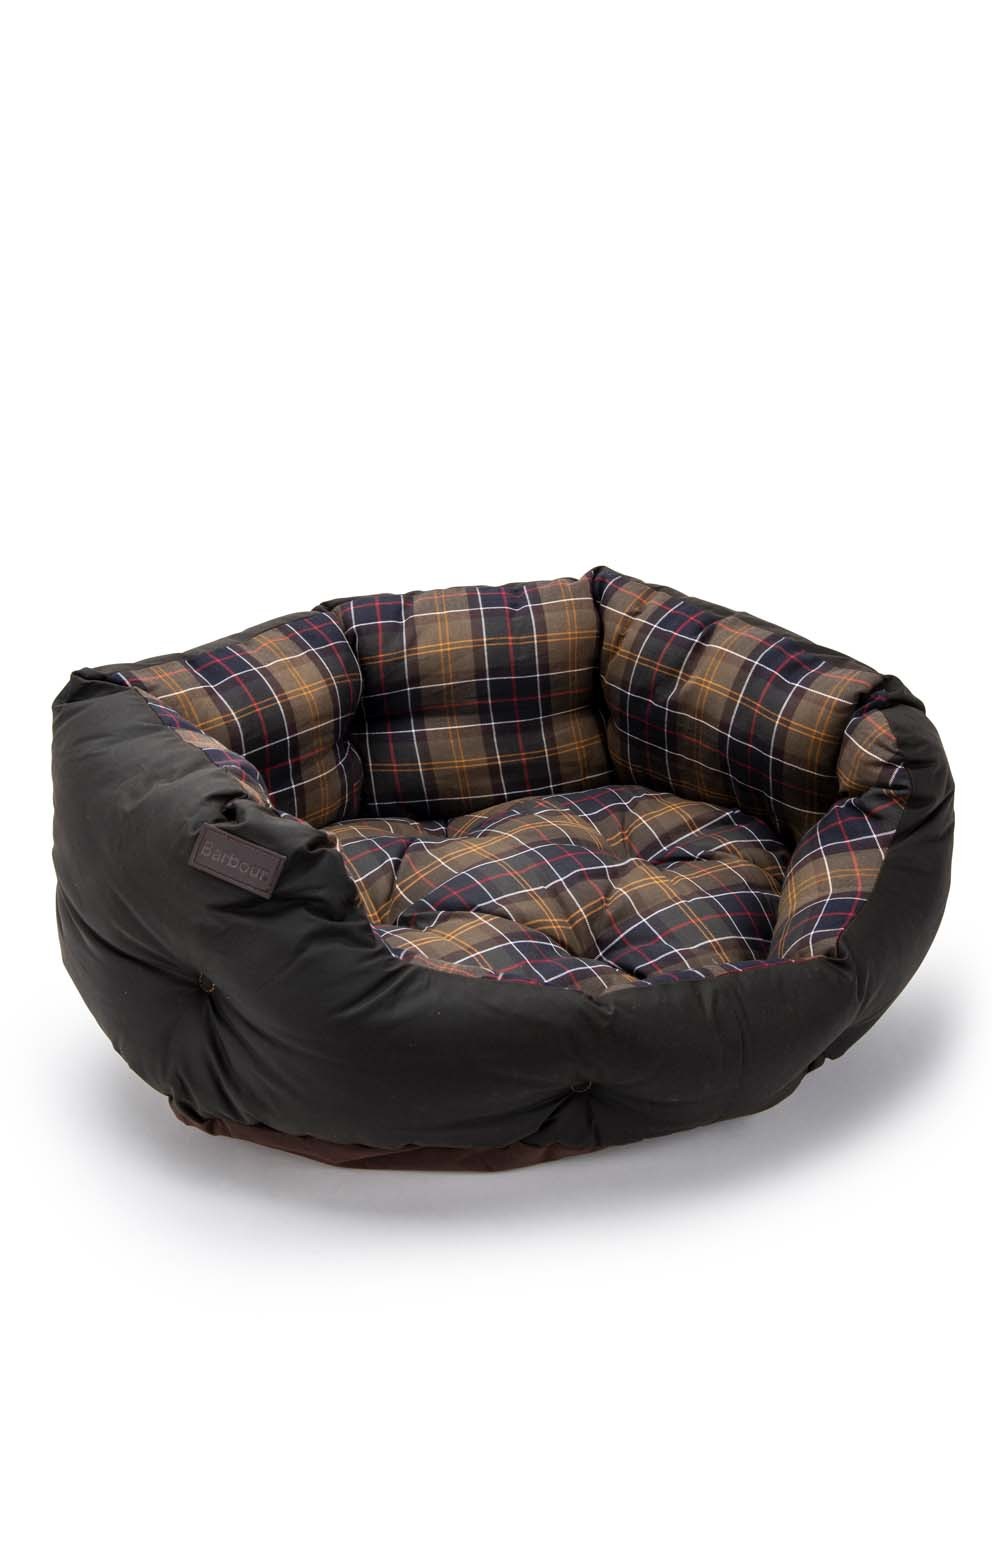 barbour dog beds sale Cheaper Than 